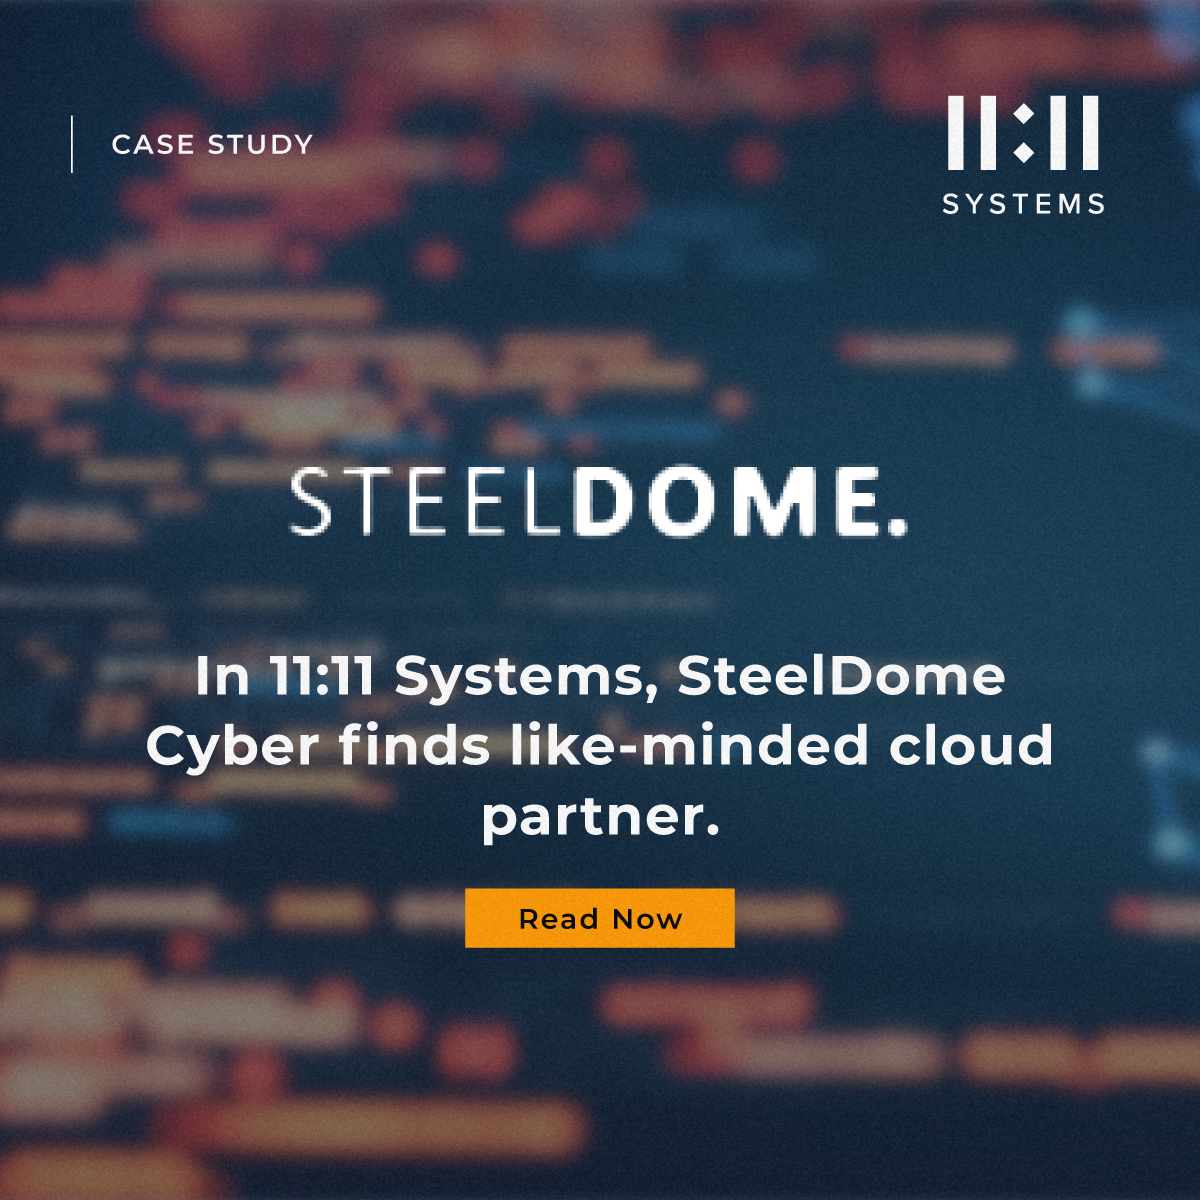 Learn how SteelDome Cyber addressed the challenges of ✔️unpredictable cloud costs and pricing models, ✔️the need for secure and reliable access to data, and ✔️a desire for trusted, like-minded security partner with 11:11 Systems in our case study: 1111systems.com/wp-content/upl…